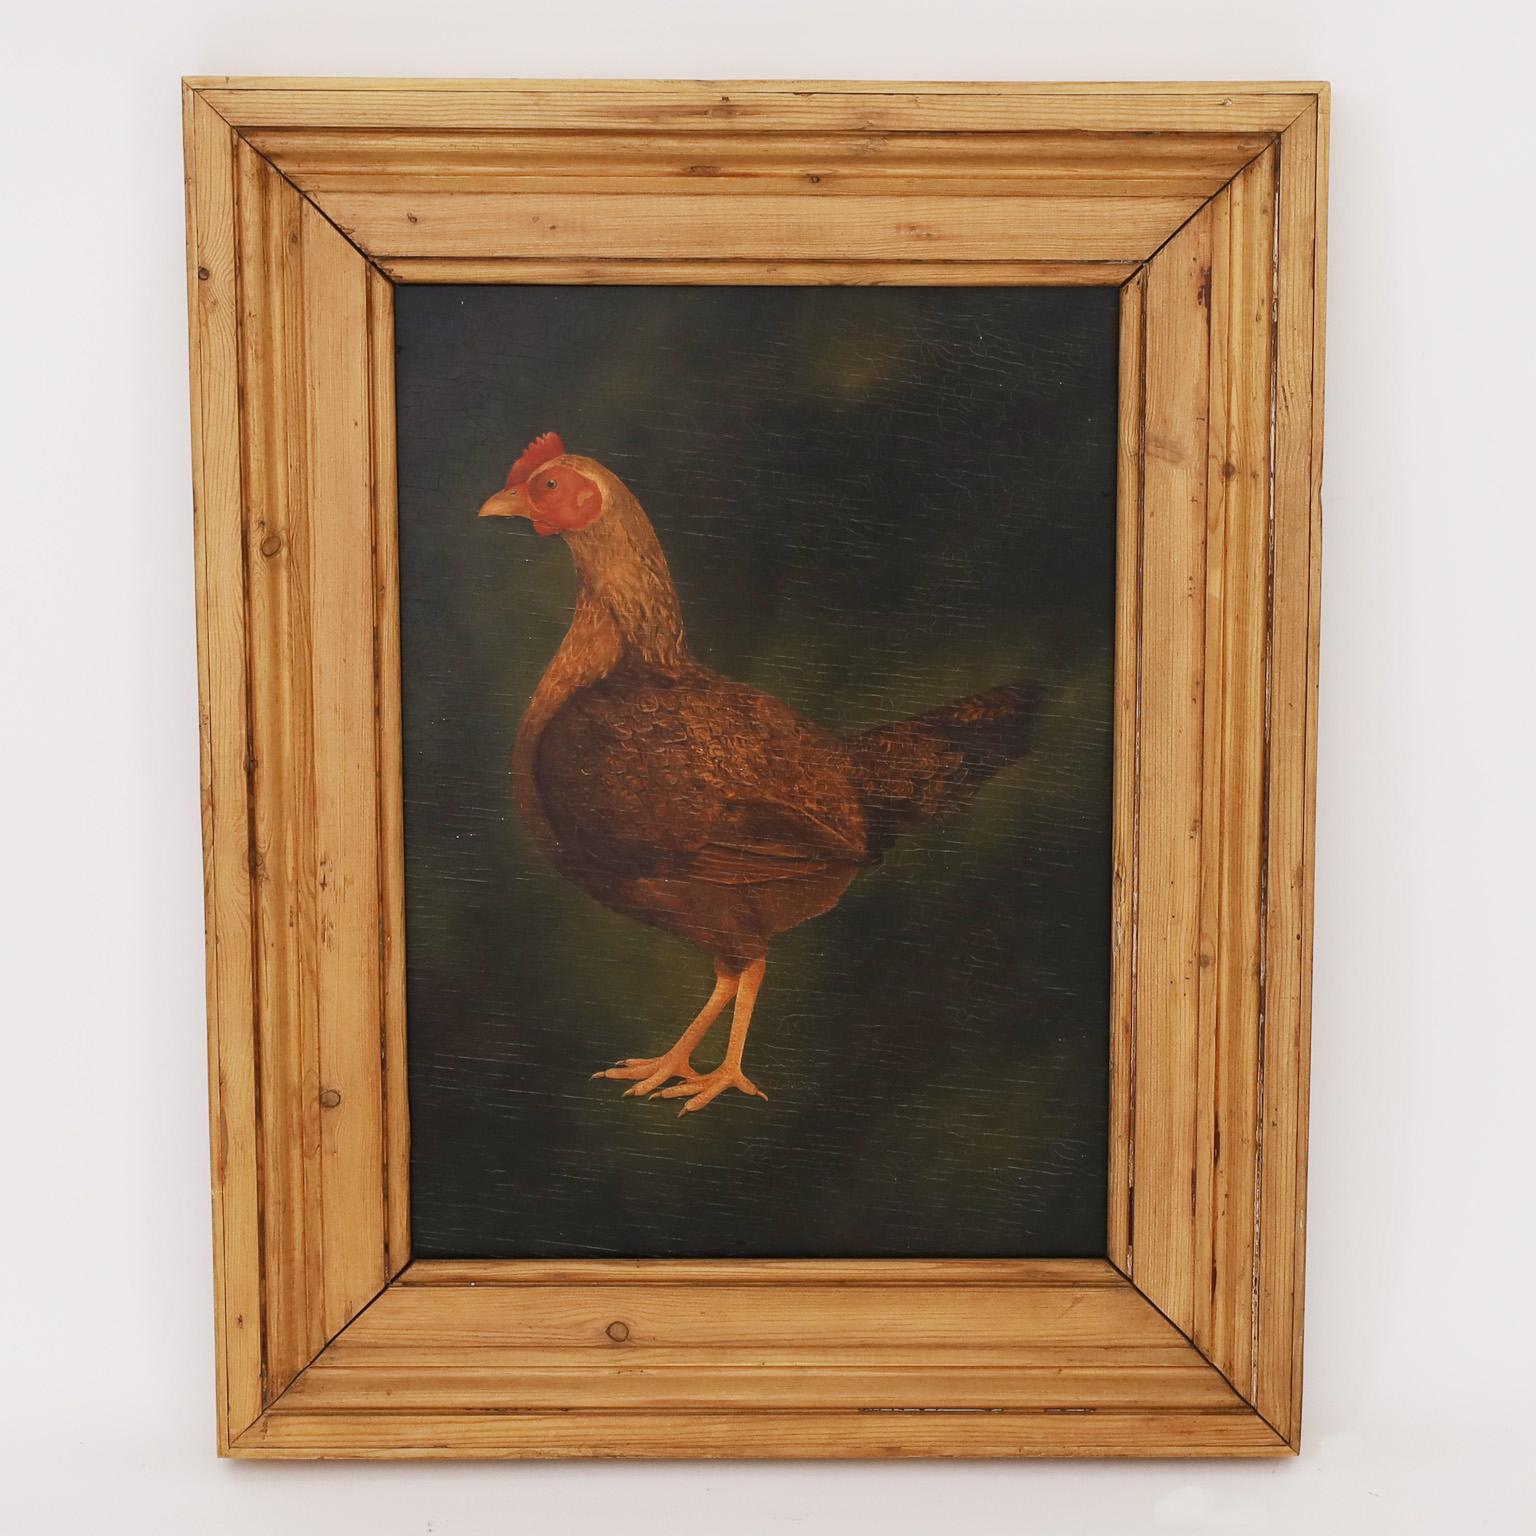 Handsome pair of oil paintings on board depicting prized roosters, executed in a primitive yet decorative technique and presented in impressive pine frames.